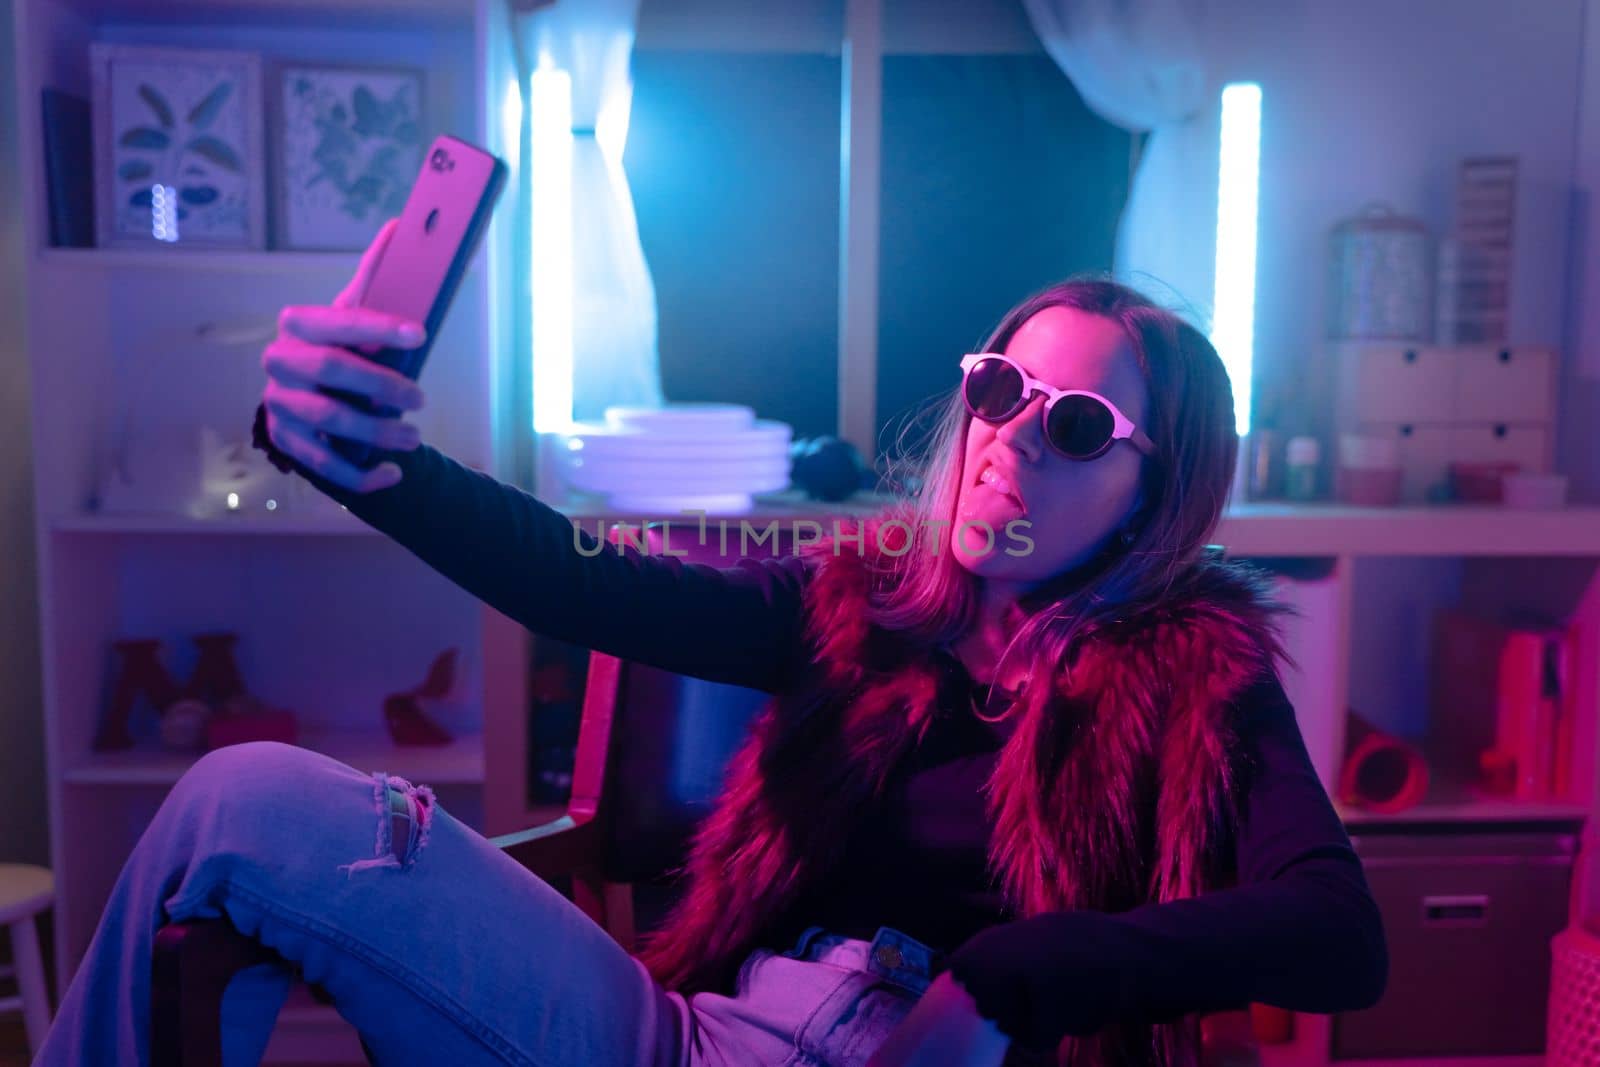 Beautiful young girl taking selfie with her phone on bed with neon colors room. Technology at bed concept. by PaulCarr